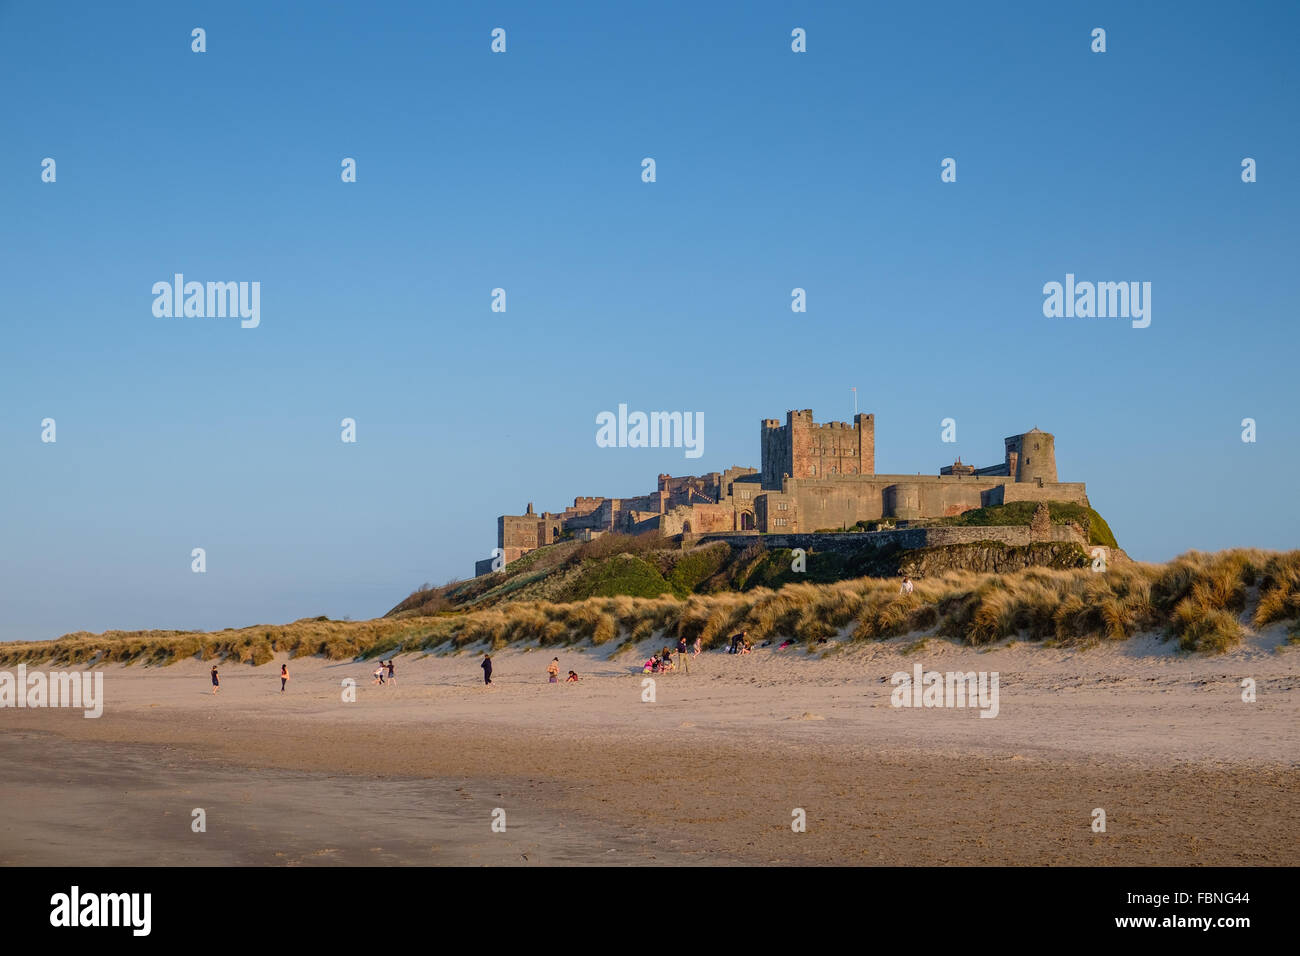 Bamburgh Castle in Northumberland, England, viewed from the beach. Stock Photo